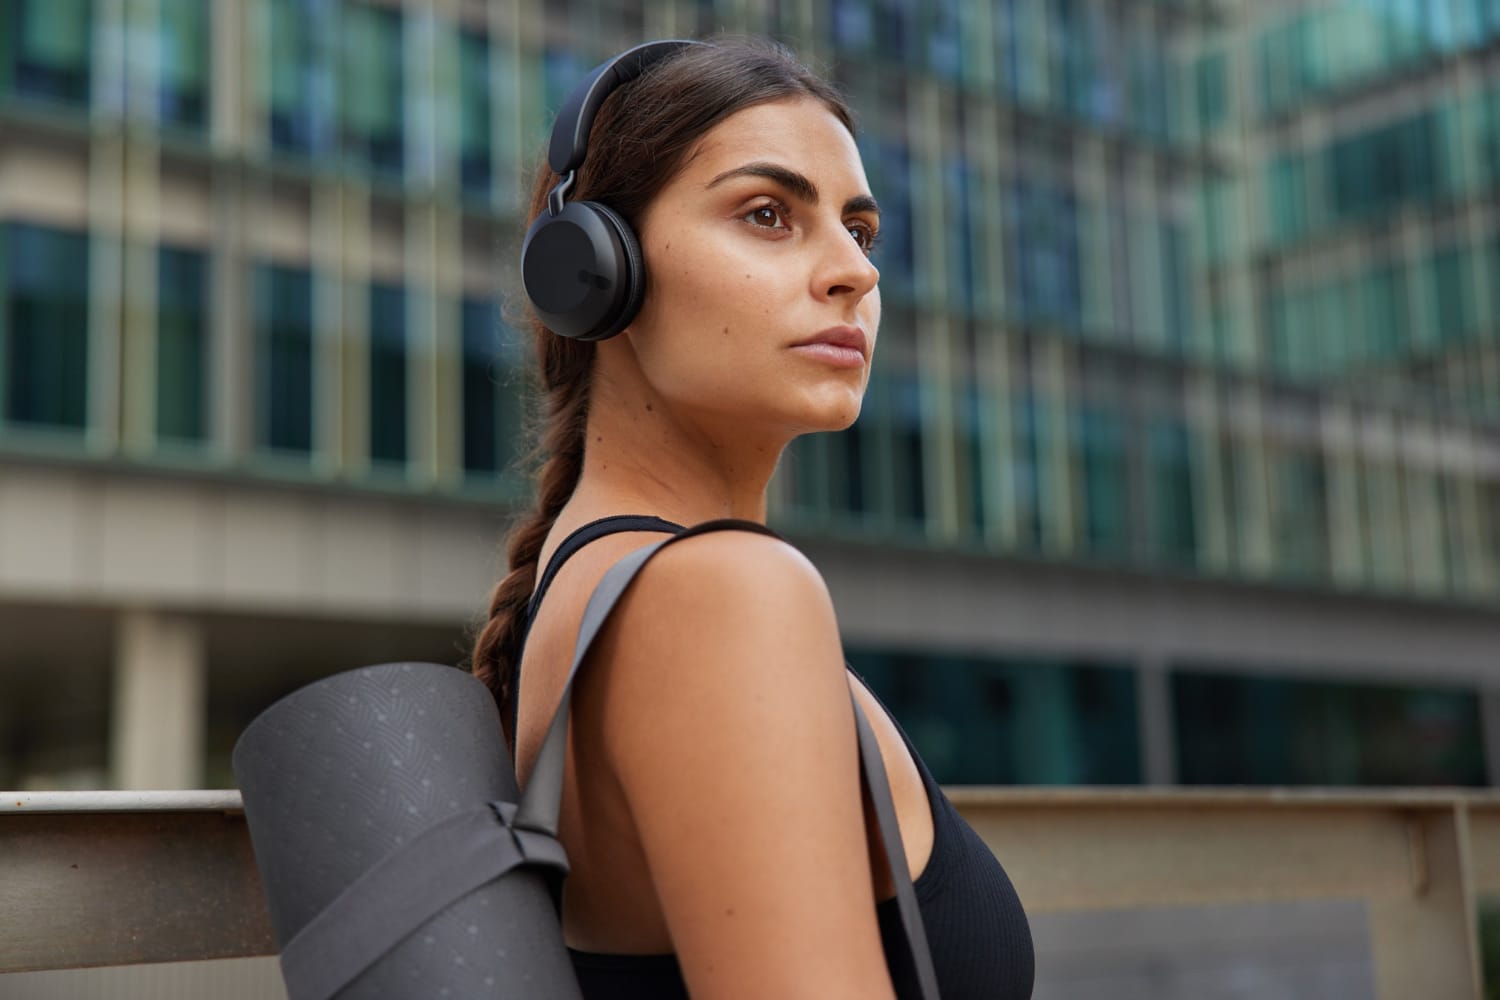 Workout Headphones: How to Choose the Right Model